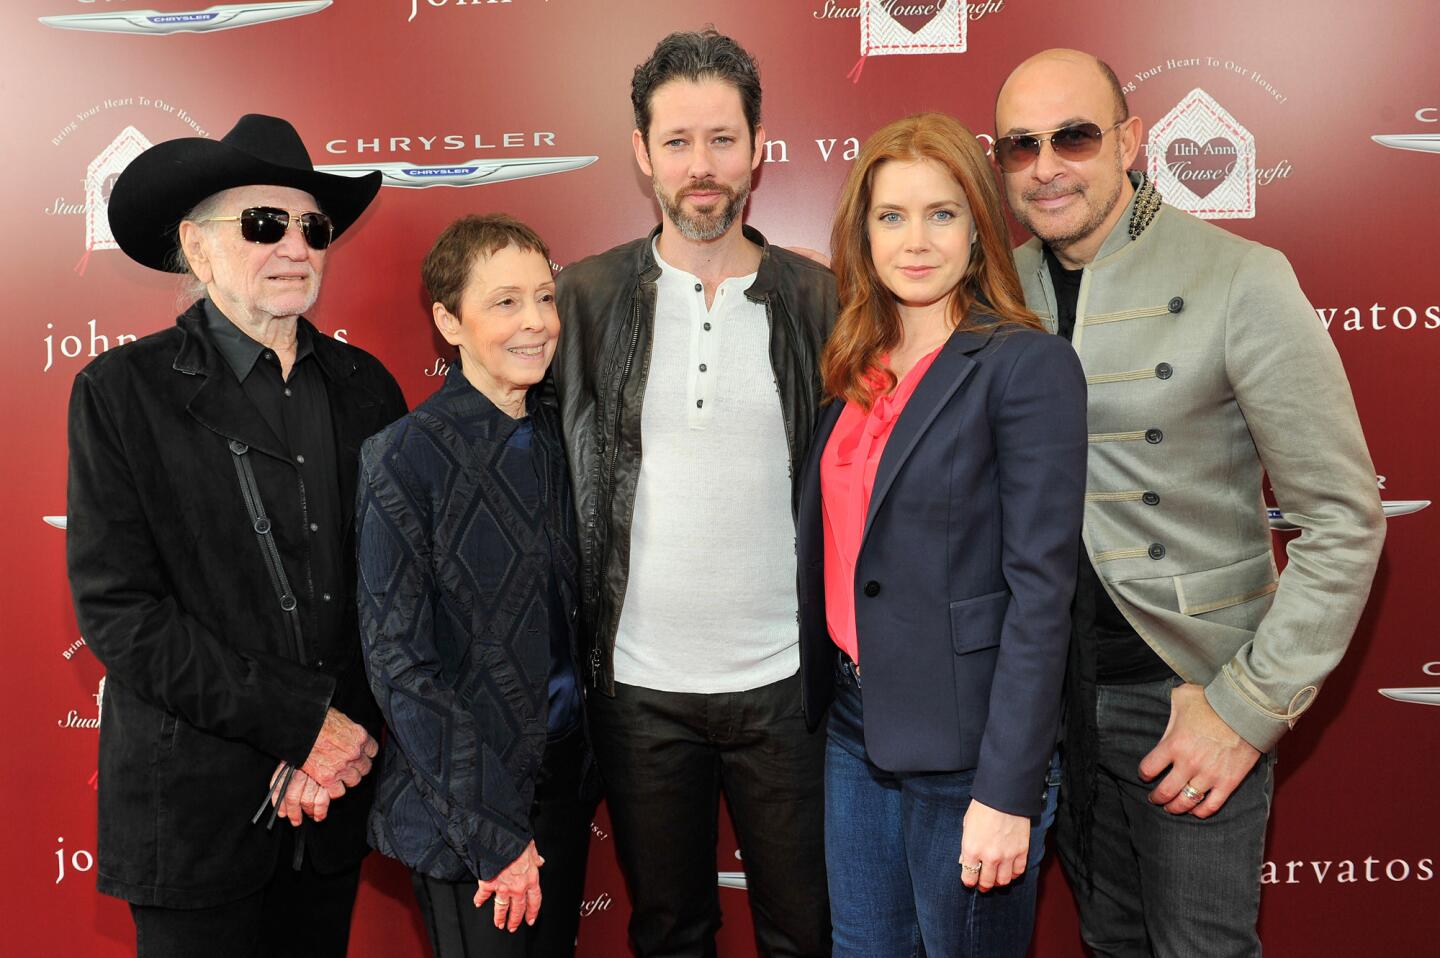 The 11th annual Stuart House benefit drew together this quintet: from left, Willie Nelson, Stuart House founder Gail Abarbanel, actor-artist Darren Le Gallo, Amy Adams and designer-event host John Varvatos. The Sunday event raised a record $939,000 for the agency that assists sexually abused children and their families.